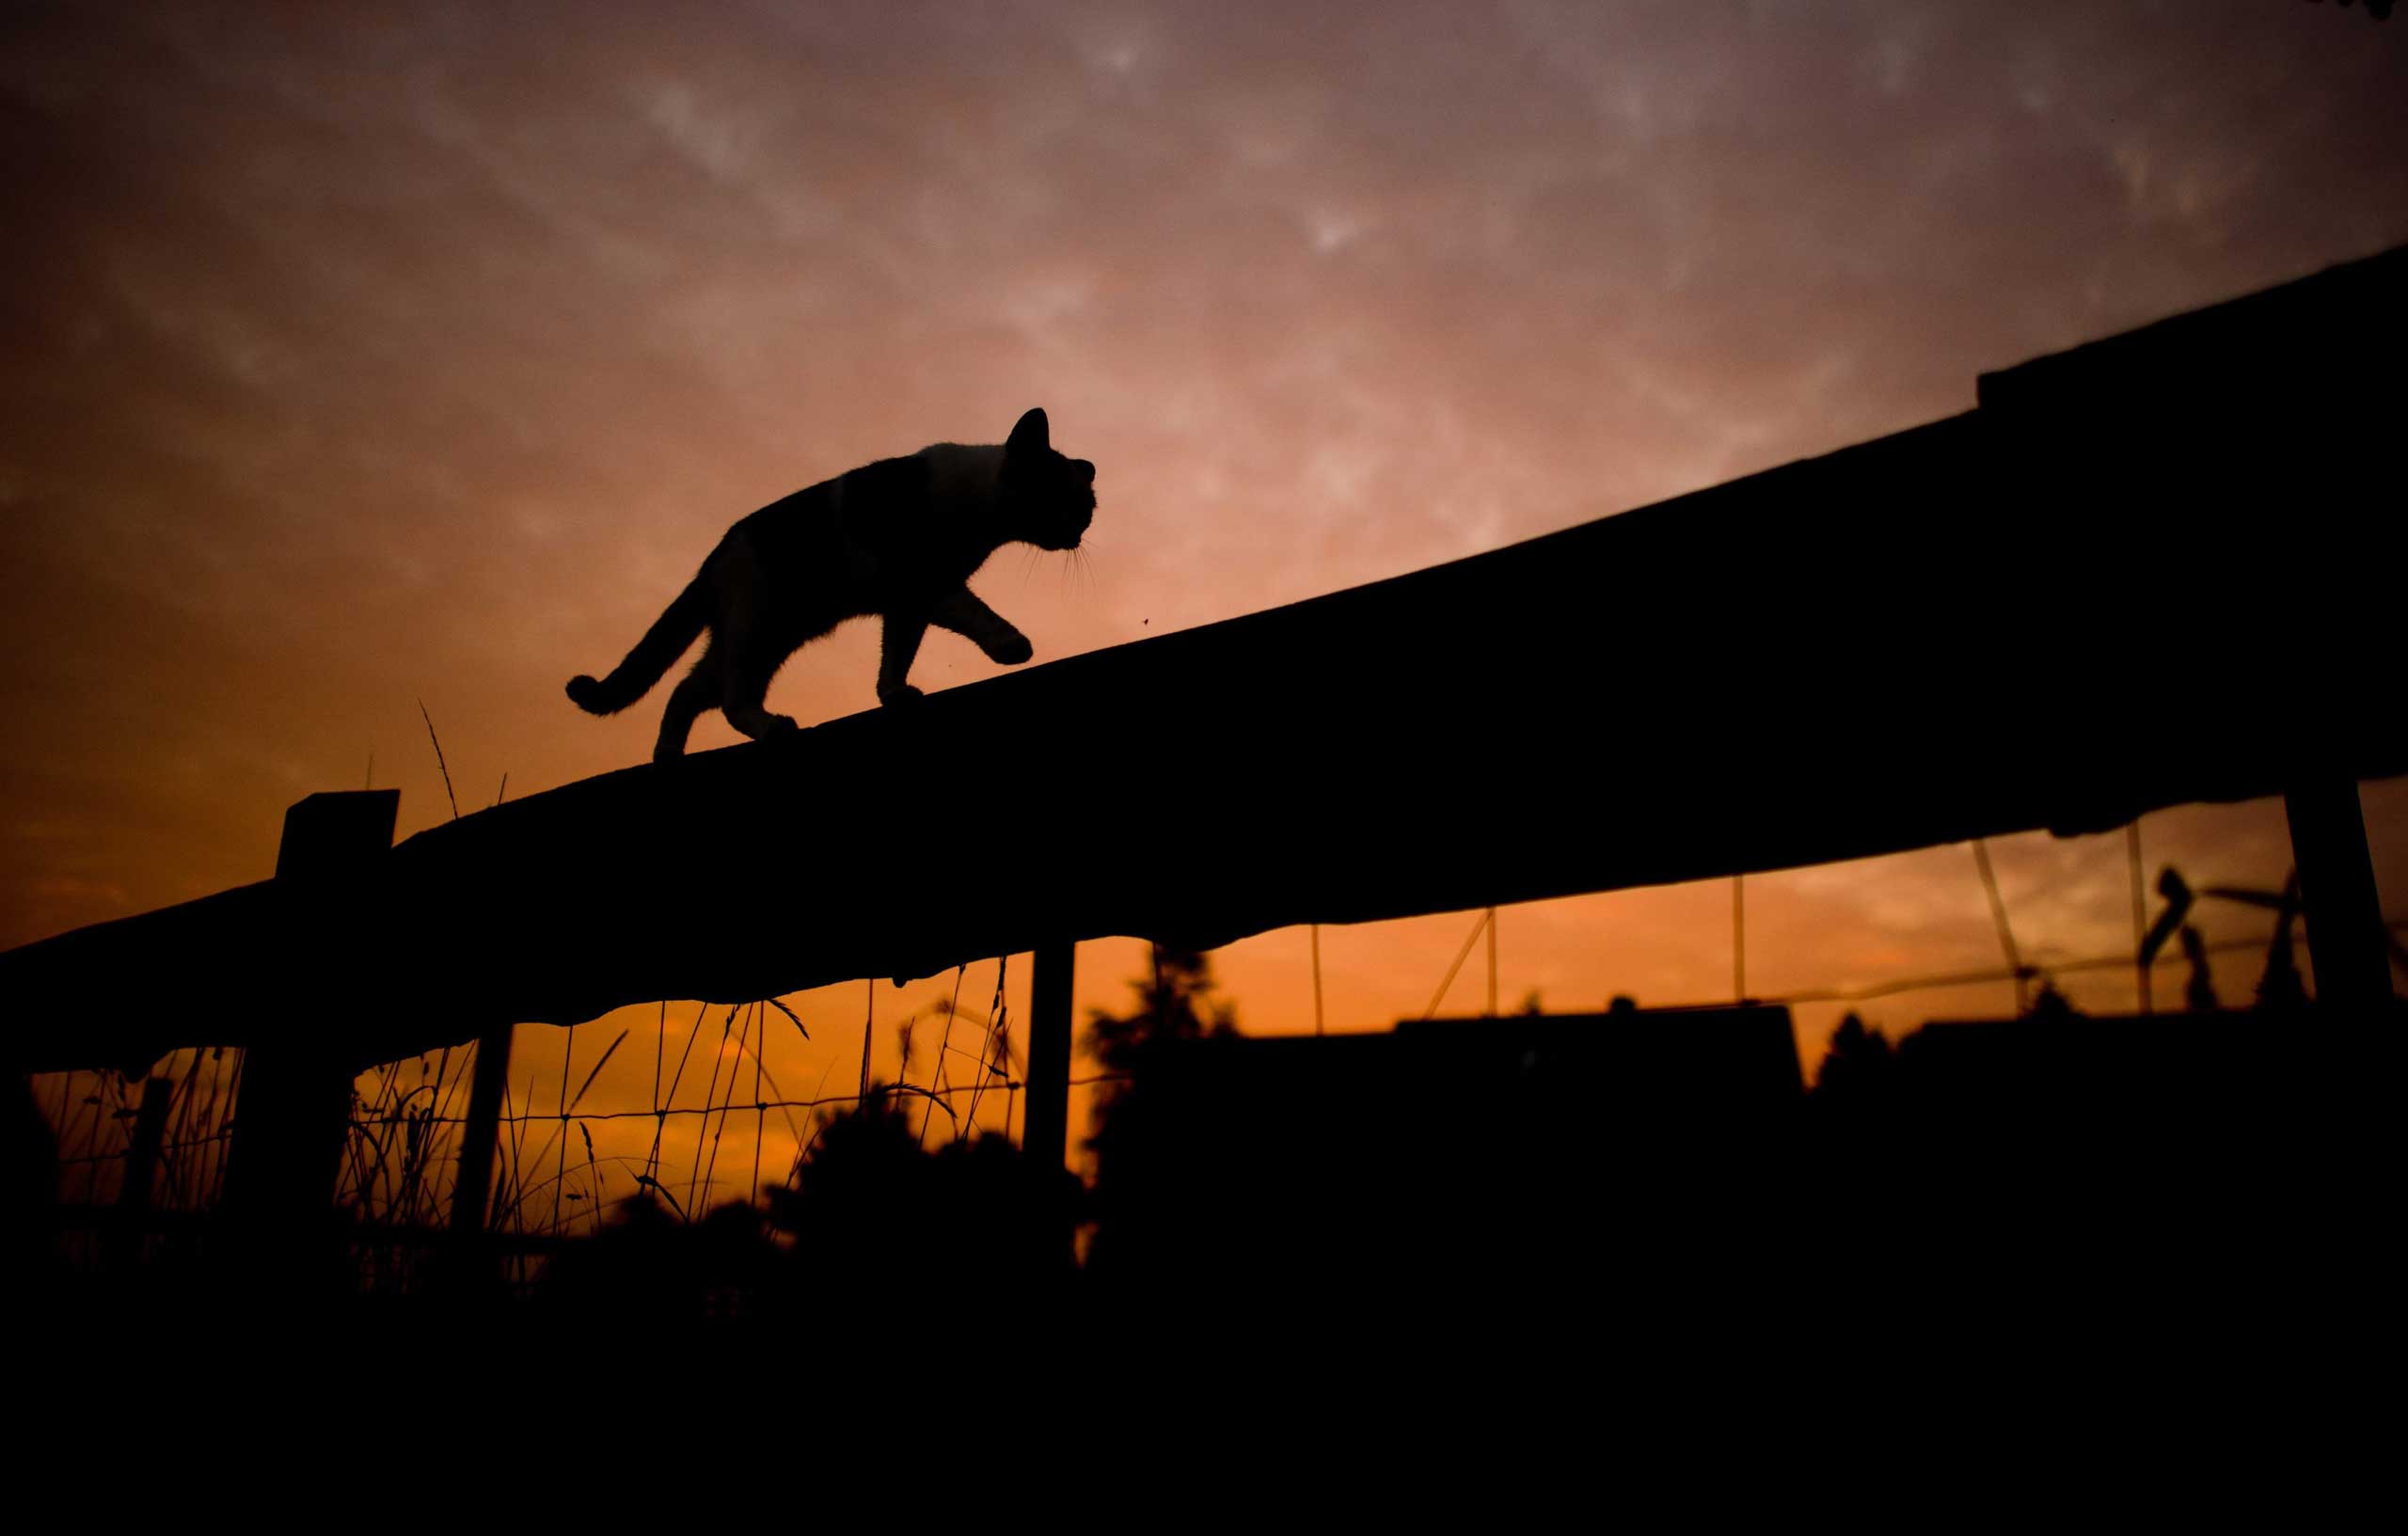 The silhouette of a cat walking on top of a fence stands out against the sky during sunrise near Sehnde, Germany on Sept. 16, 2014.